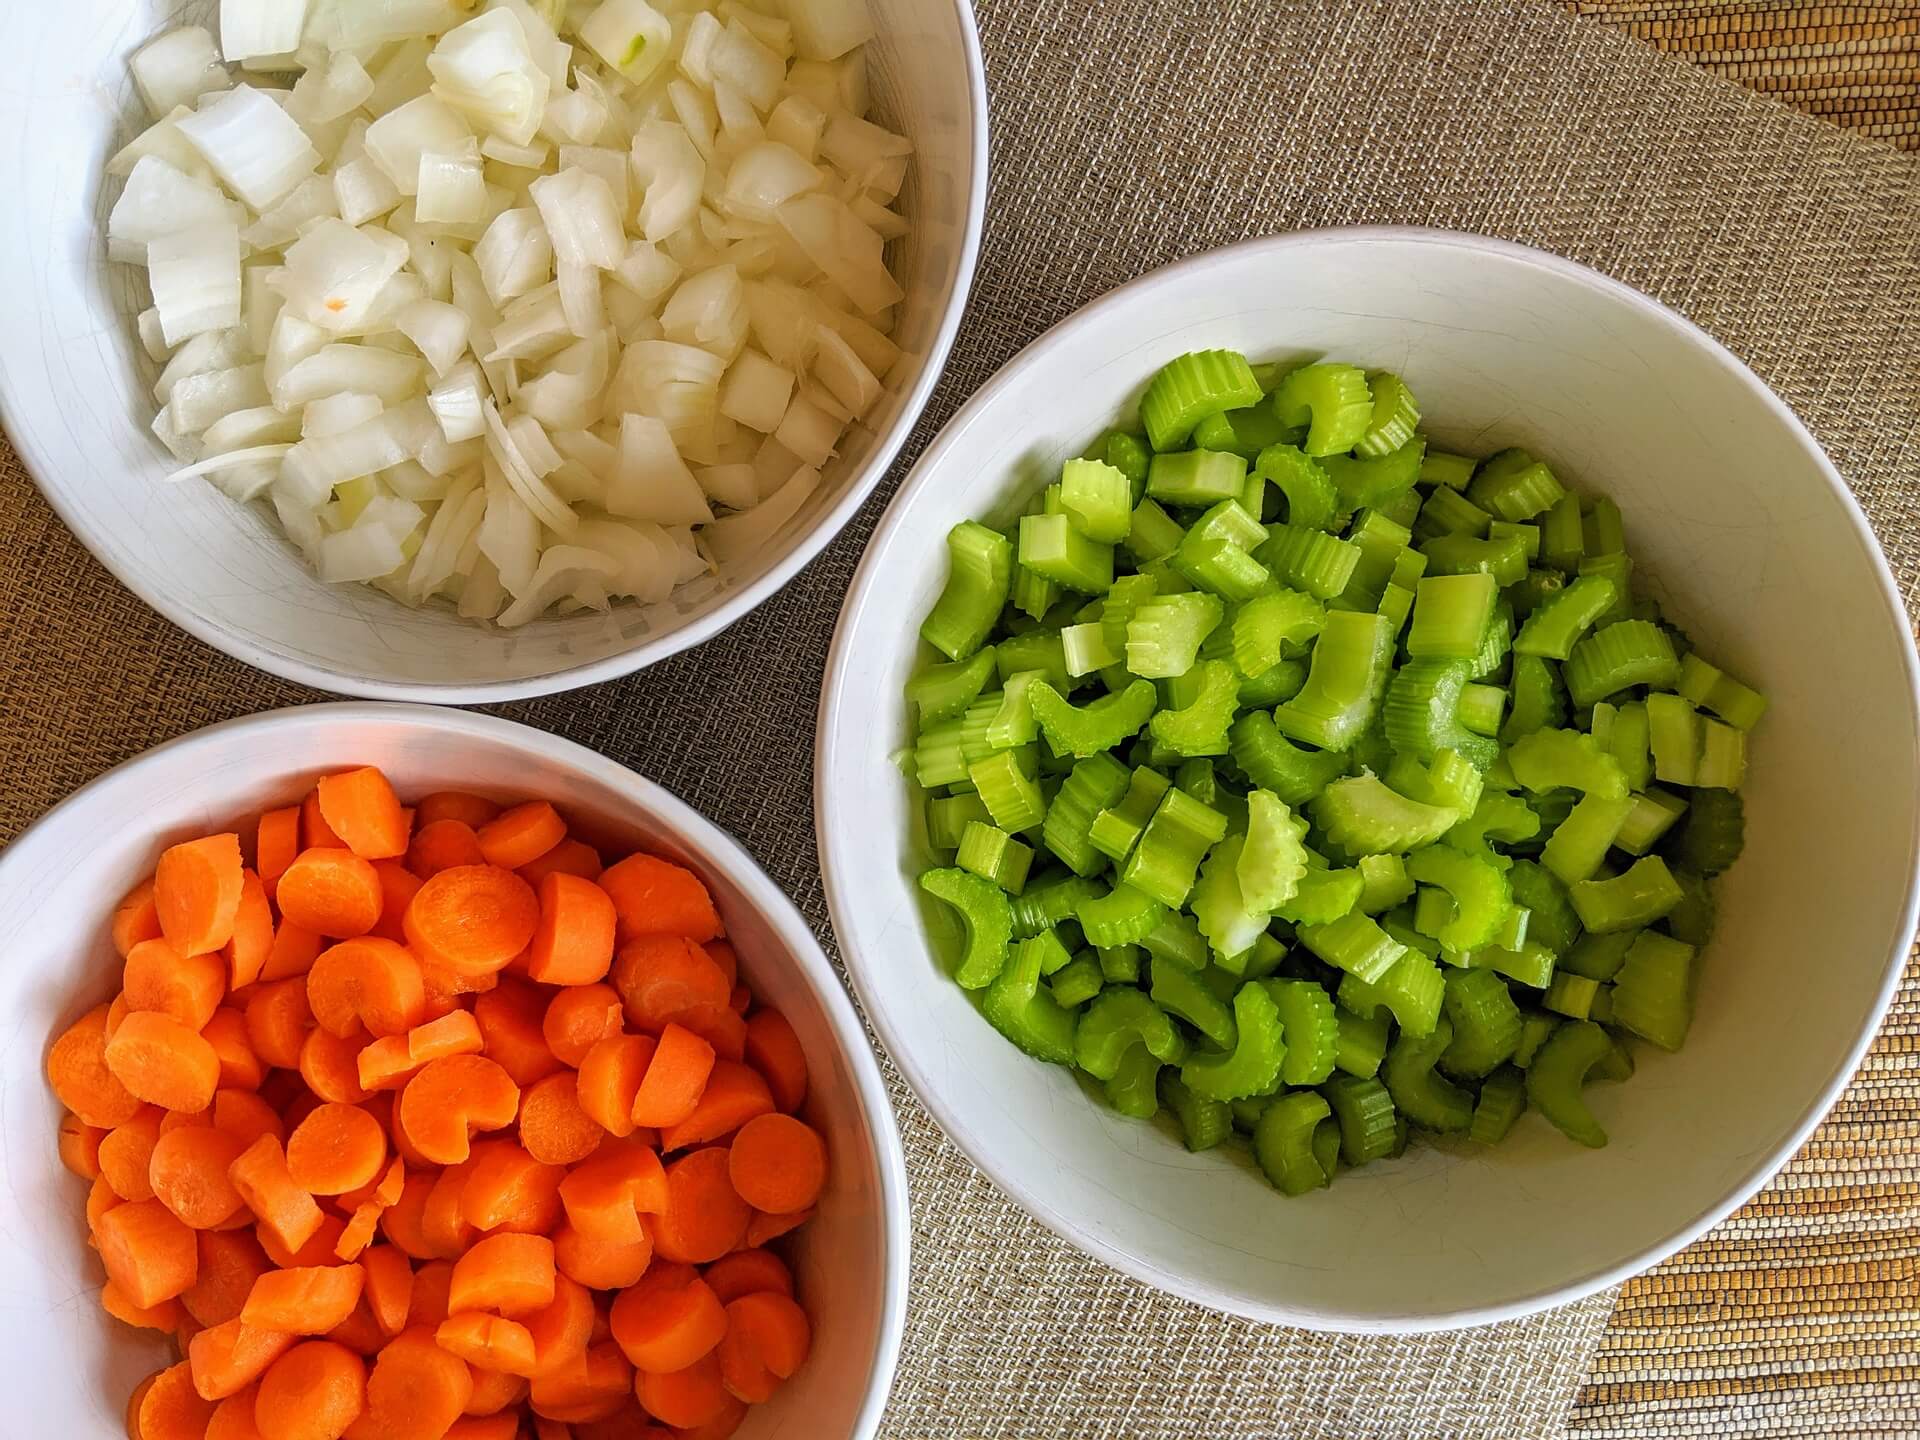 Carrots, celery and onions